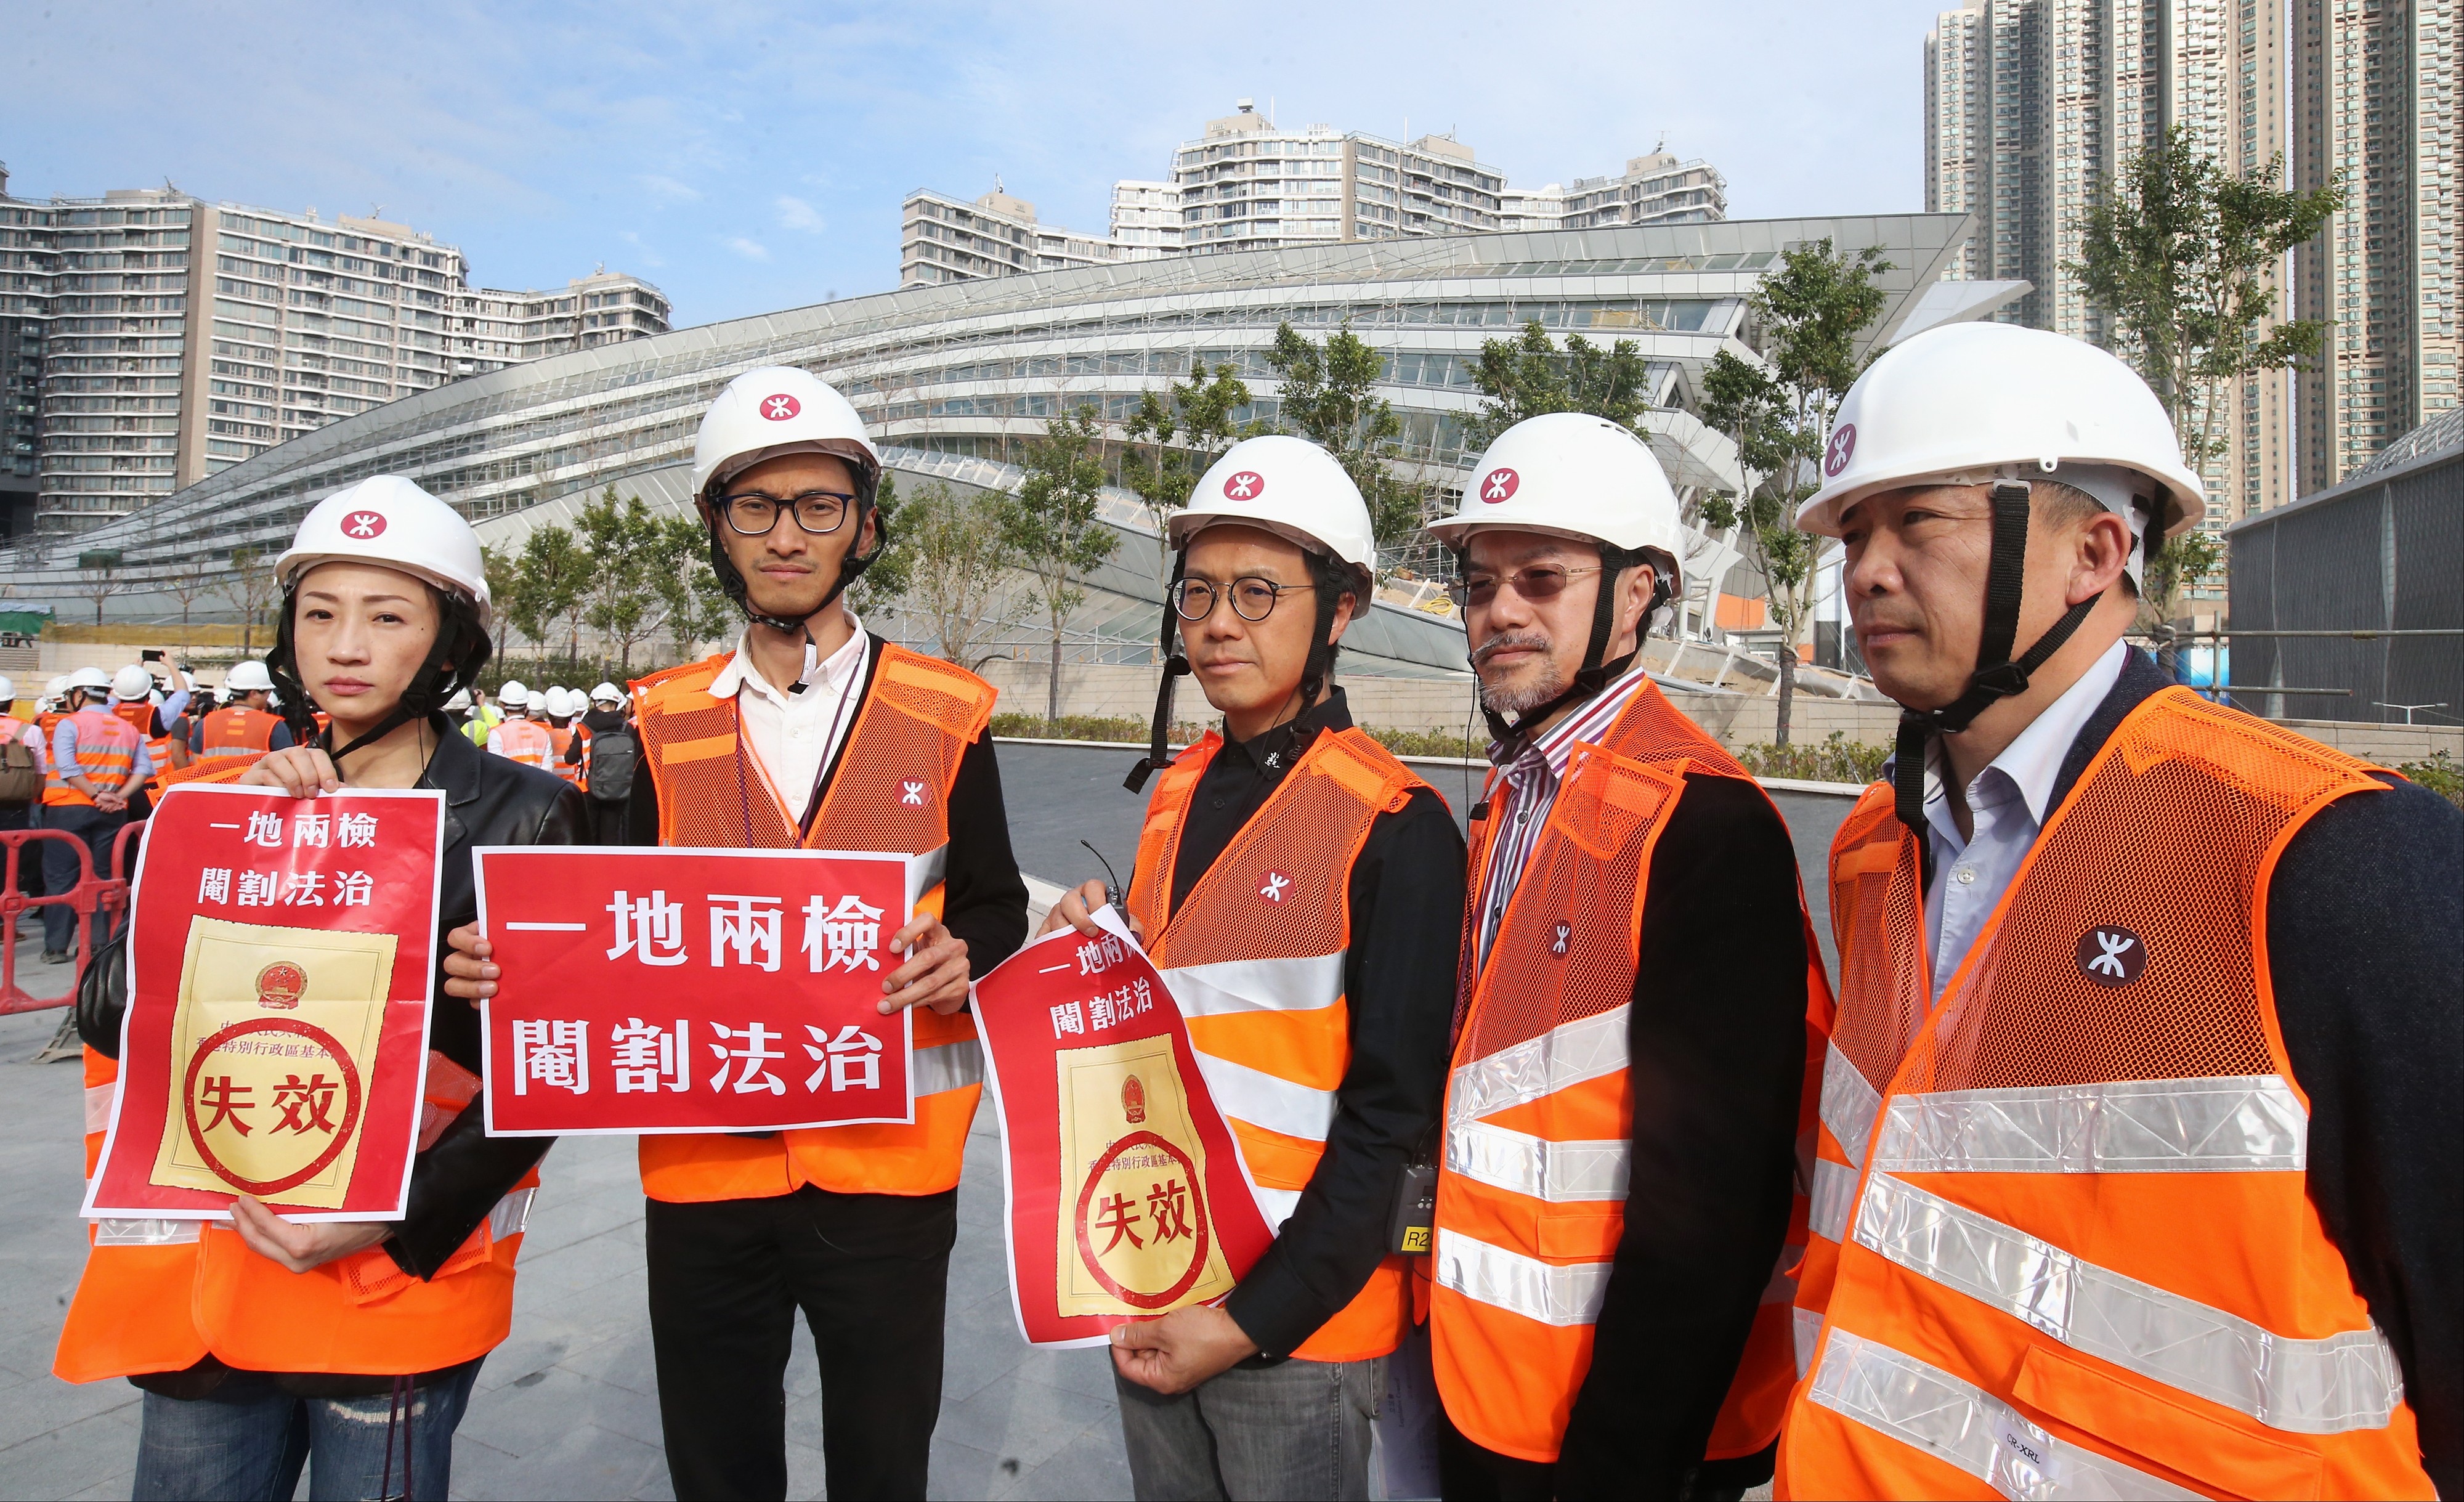 Hong Kong’s opposition lawmakers, including (from left) Tanya Chan and Eddie Chu Hoi-dick, protest against the proposed joint immigration checkpoint, in front of the West Kowloon terminus of the high-speed rail link, on February 27. Photo: David Wong